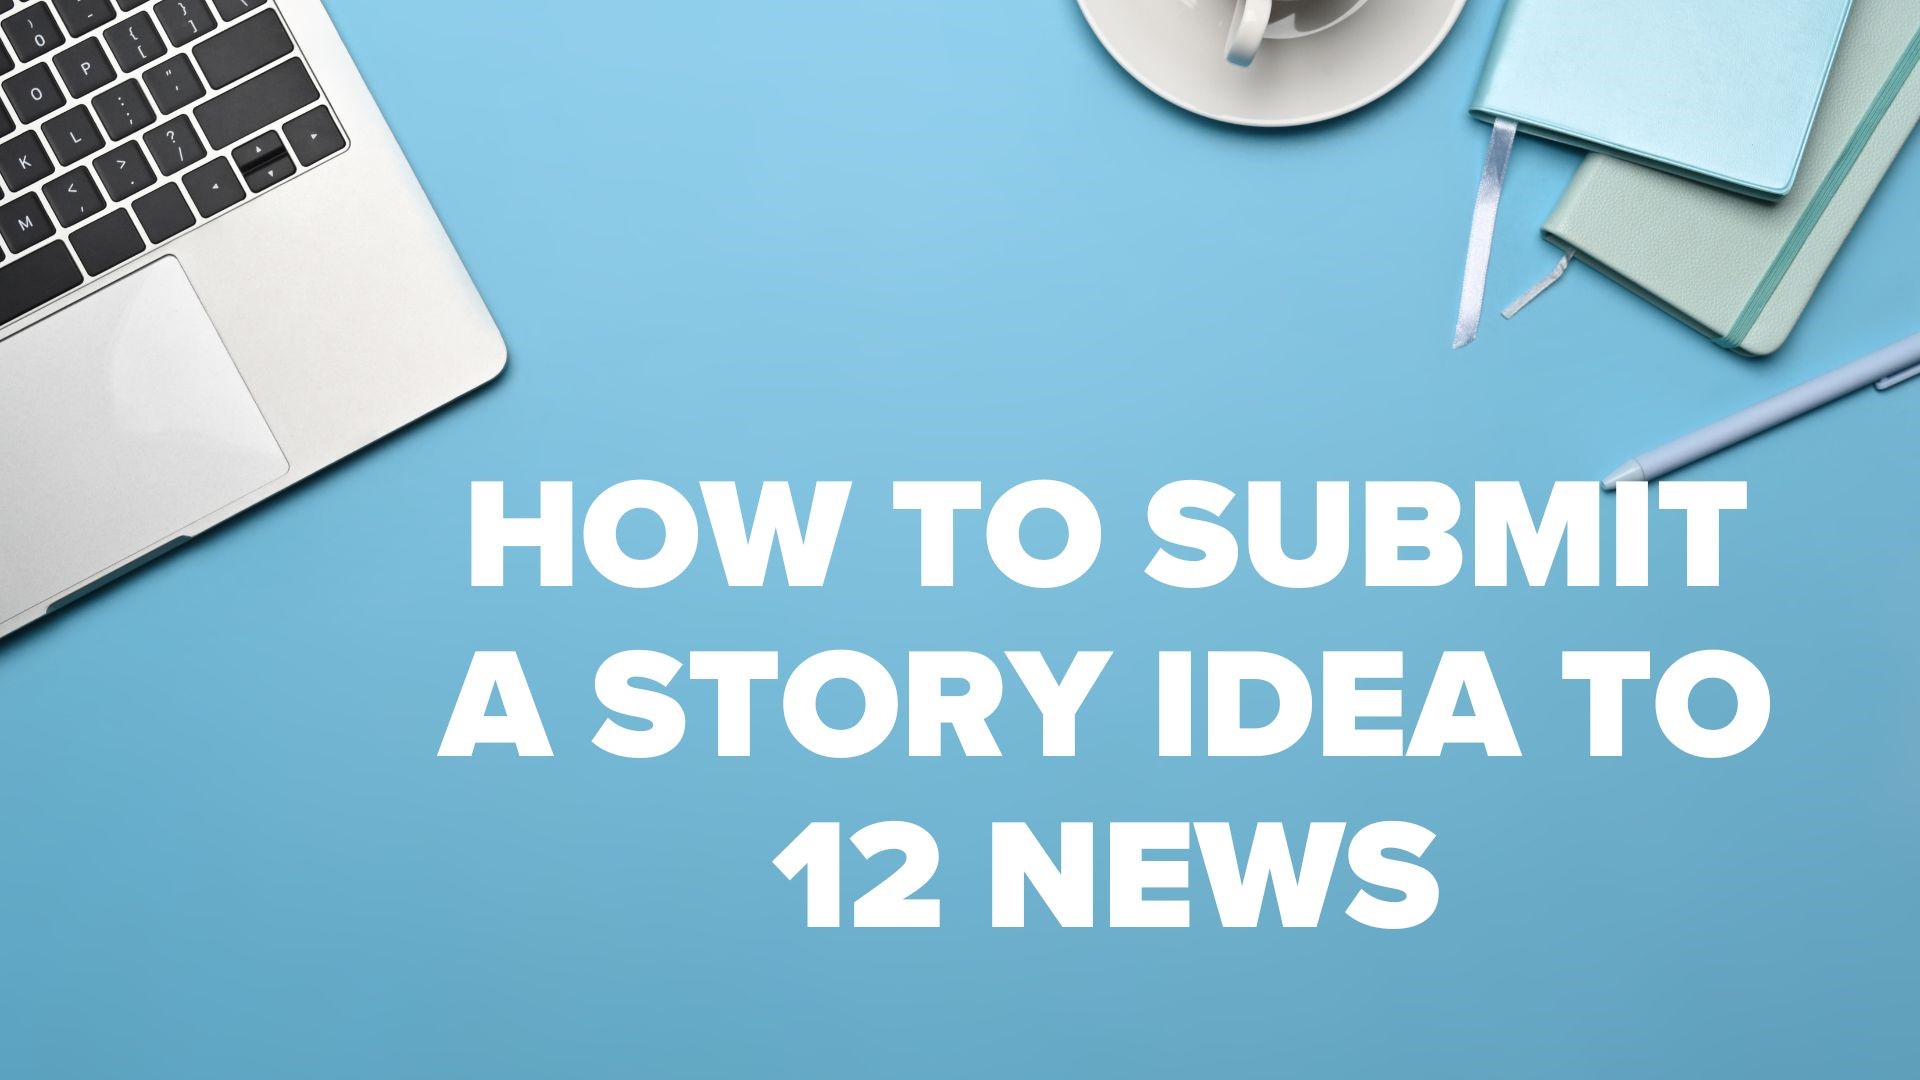 Here's how to share story ideas with 12 News. There are a few different ways to share your tips.